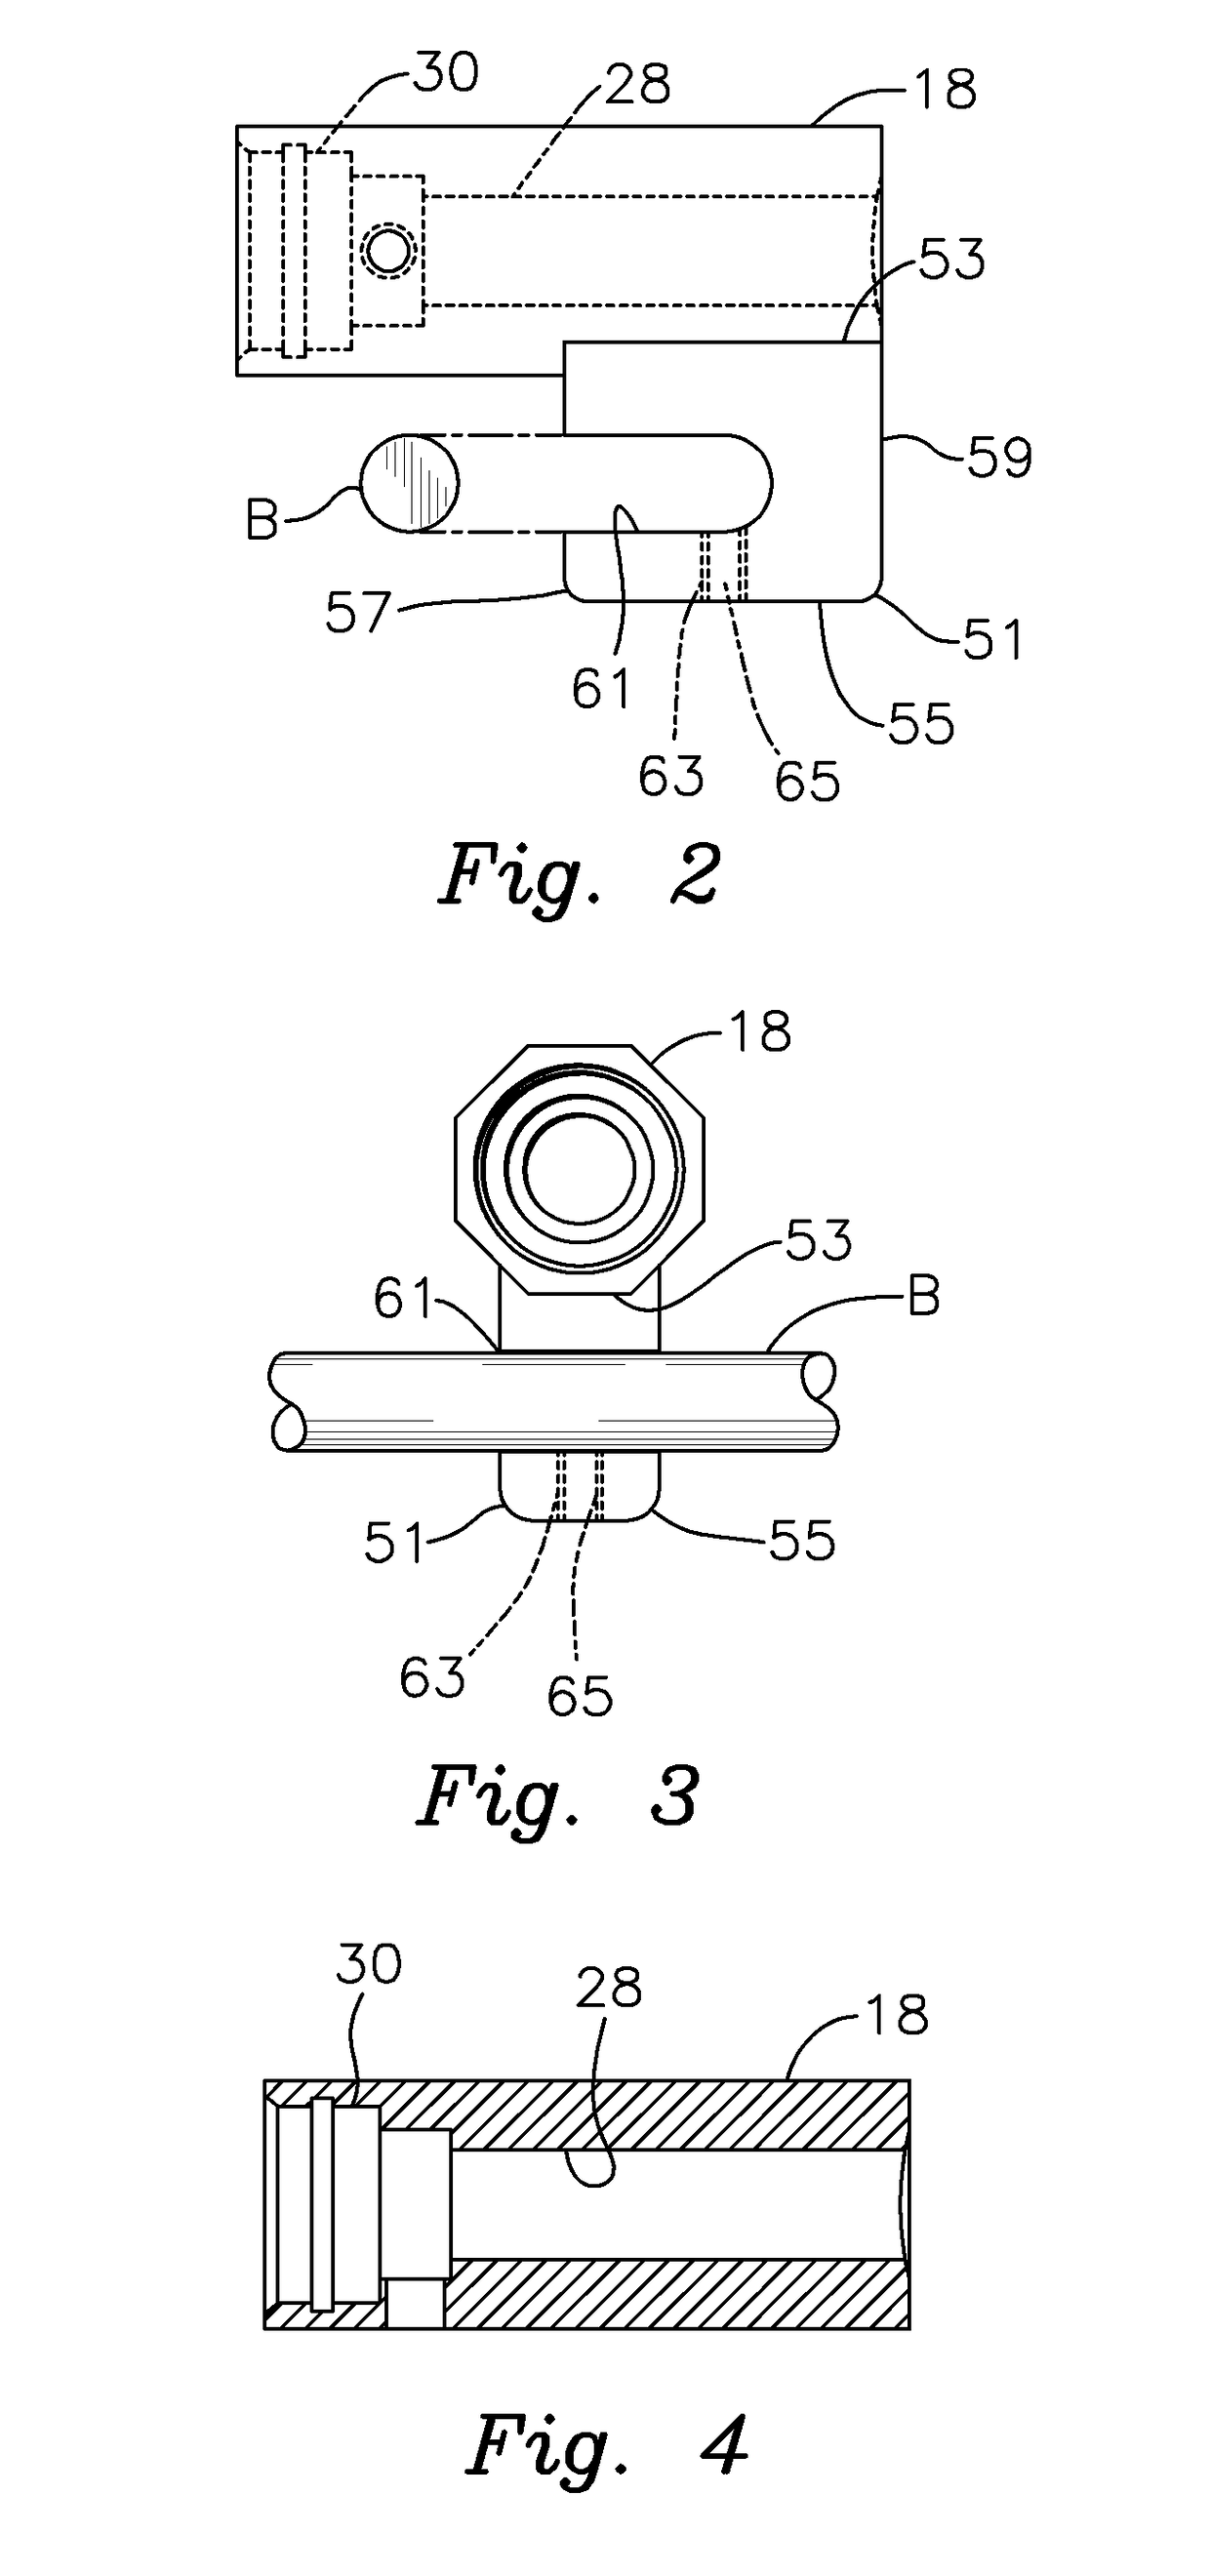 Mounting Clamp For An Illuminated Surgical Retractor System